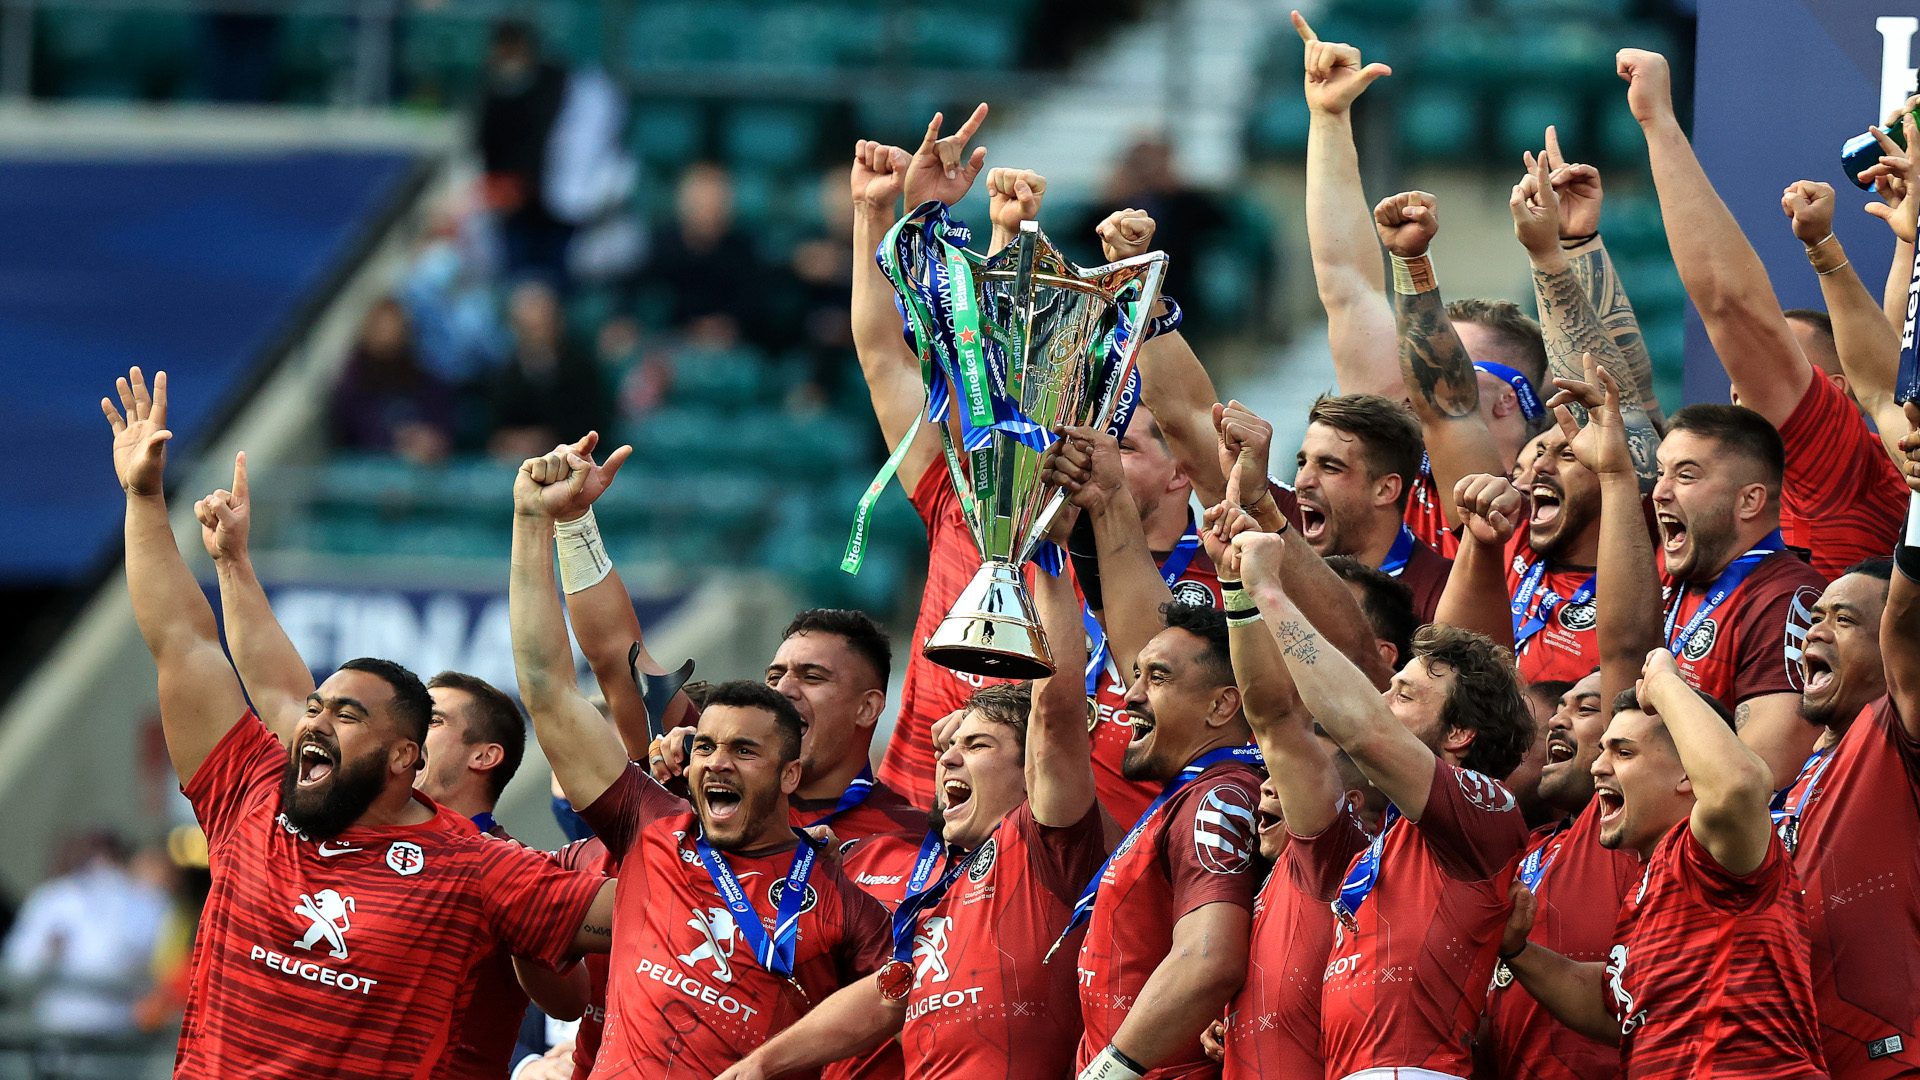 How to watch European Champions Cup rugby and live stream every game from anywhere